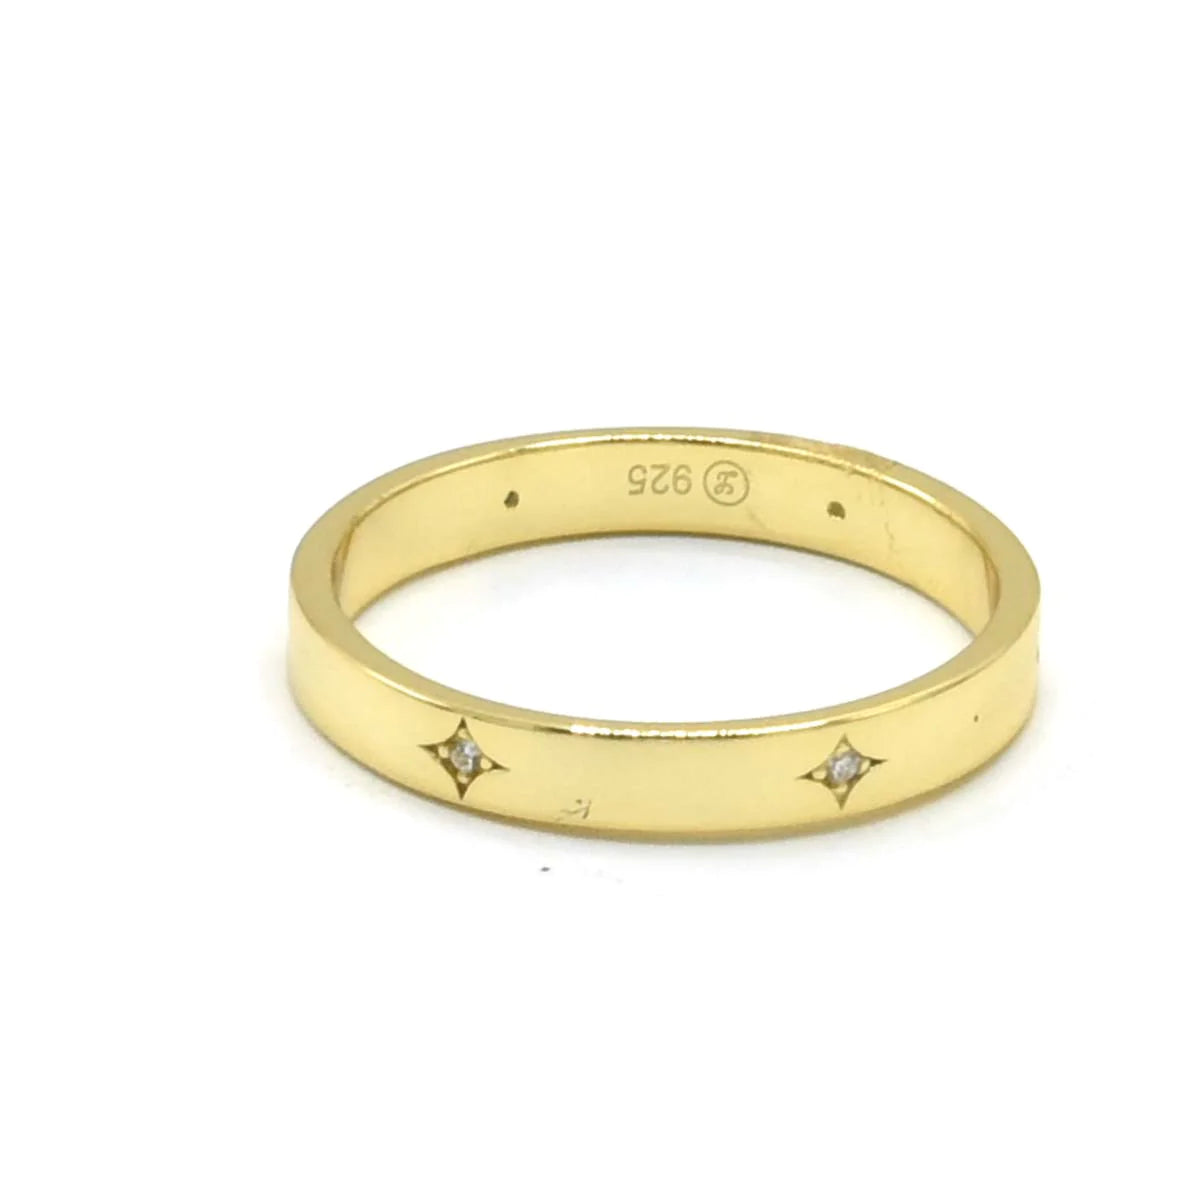 Lonely Star Band Ring